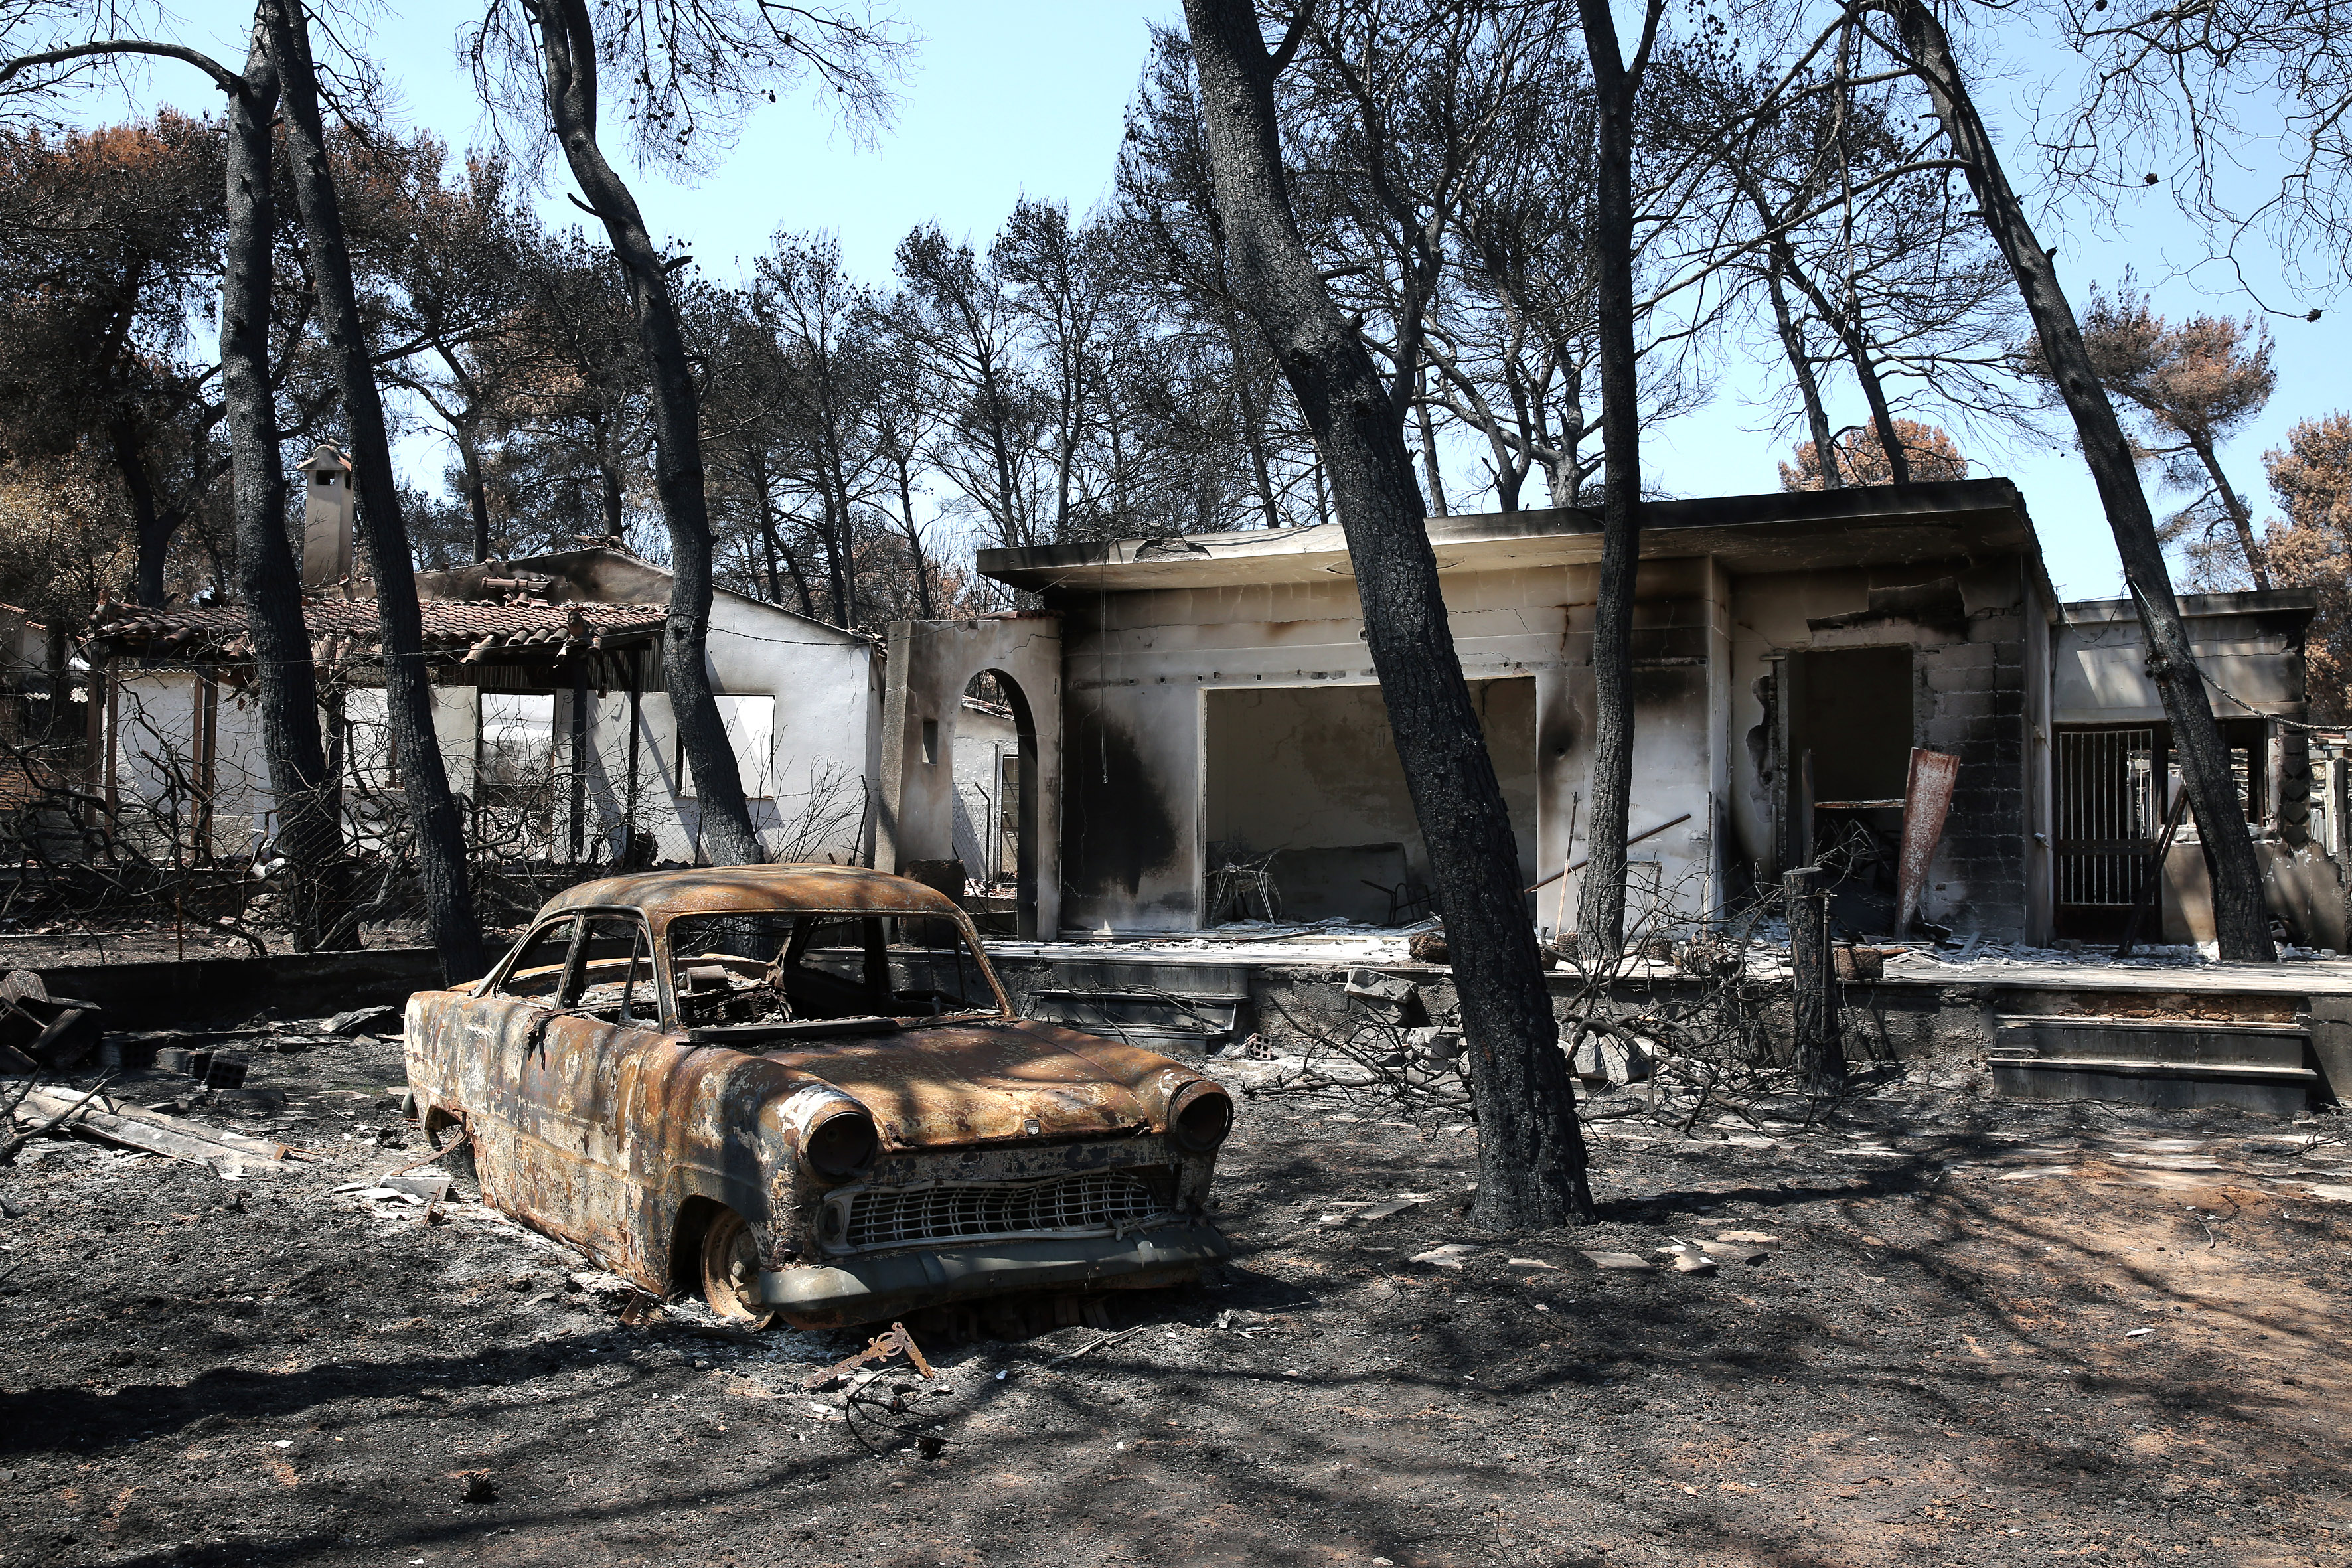 Monthly rent subsidies of 300-500 euros approved for Mati, other wildfire victims